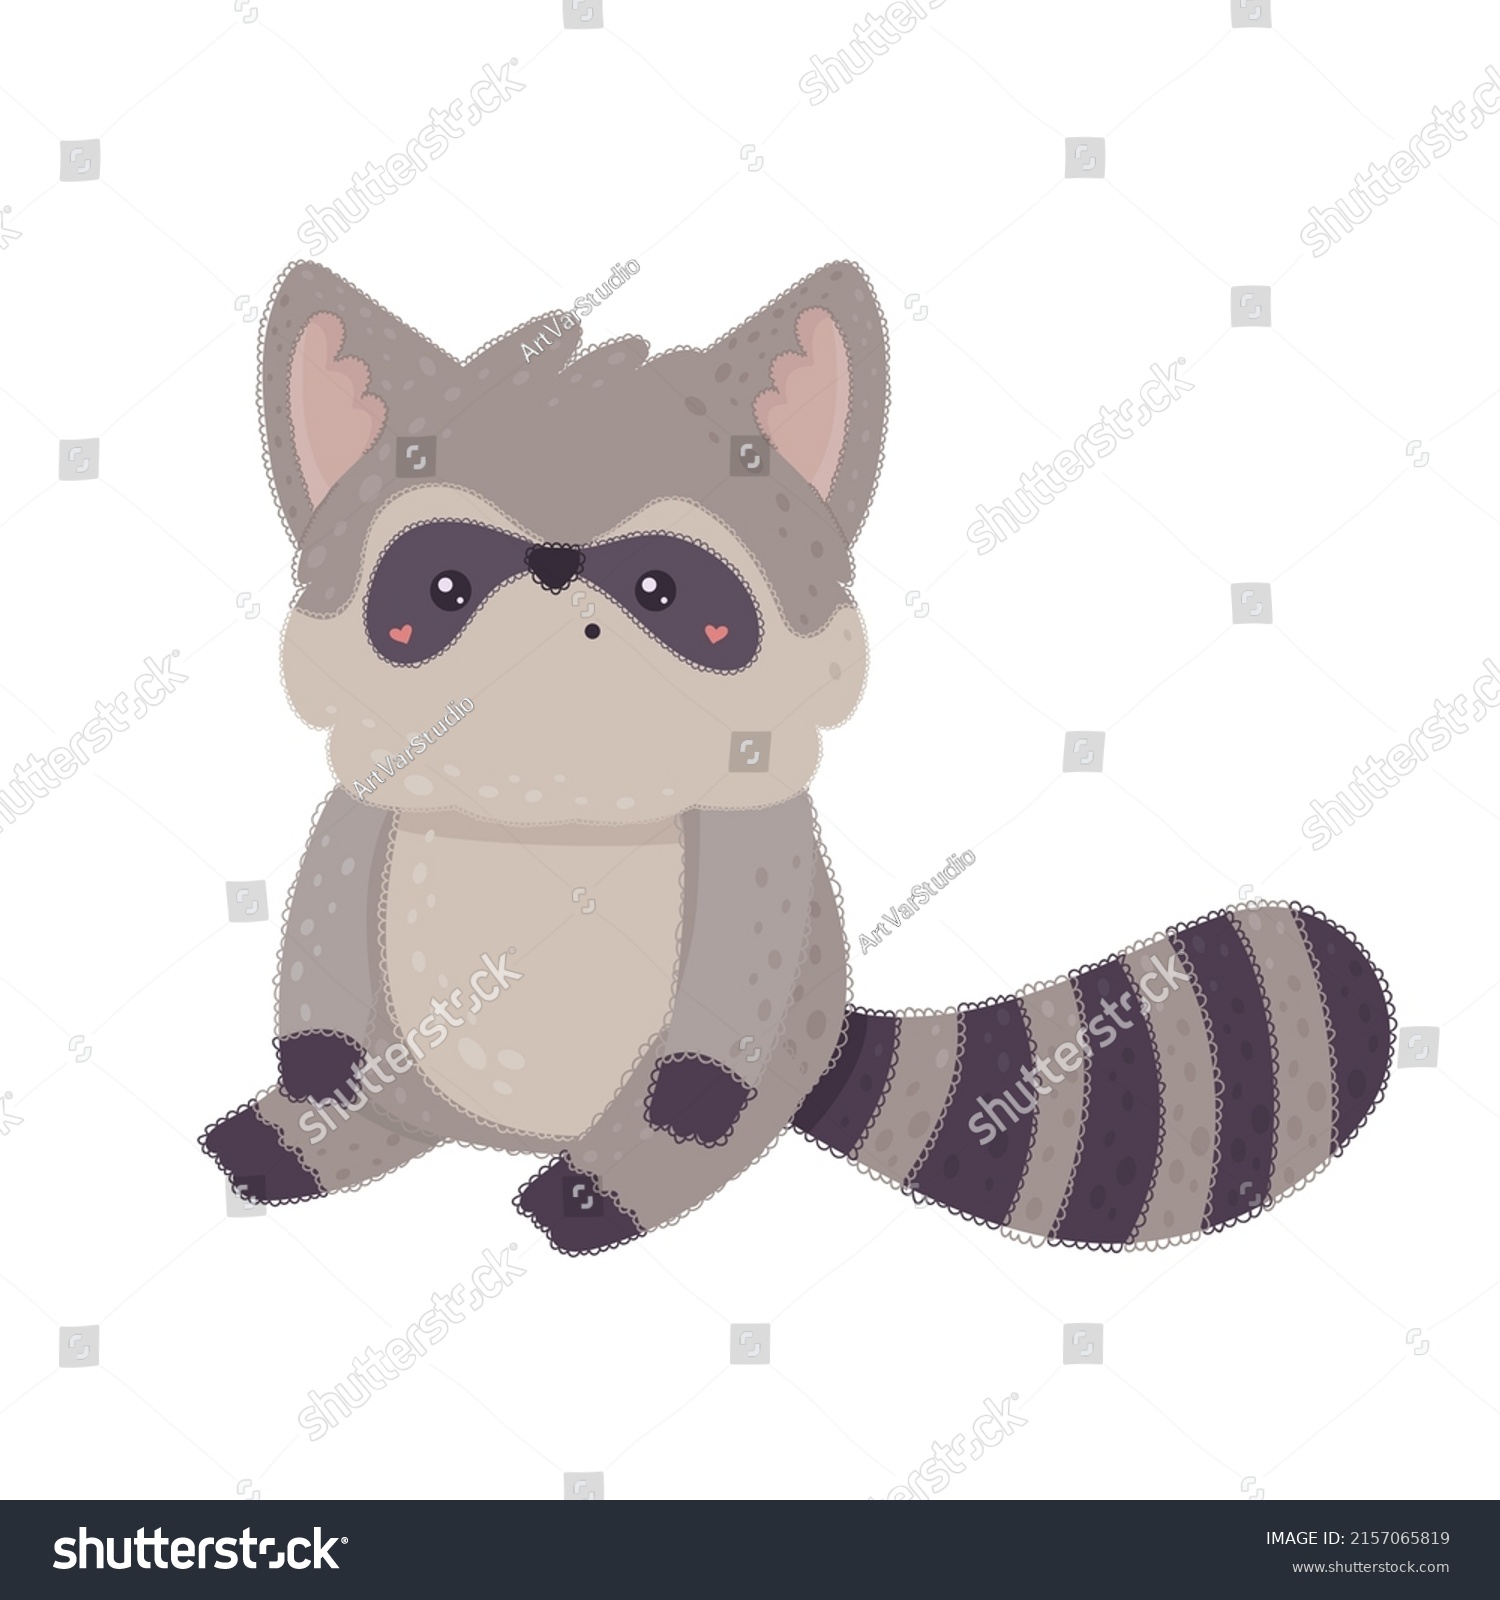 SVG of Raccoon in kawaii cartoon style. Vector illustration of a cute animal. Cute little illustration of racoon for kids, baby book, fairy tales, covers, baby shower invitation, textile t-shirt. svg